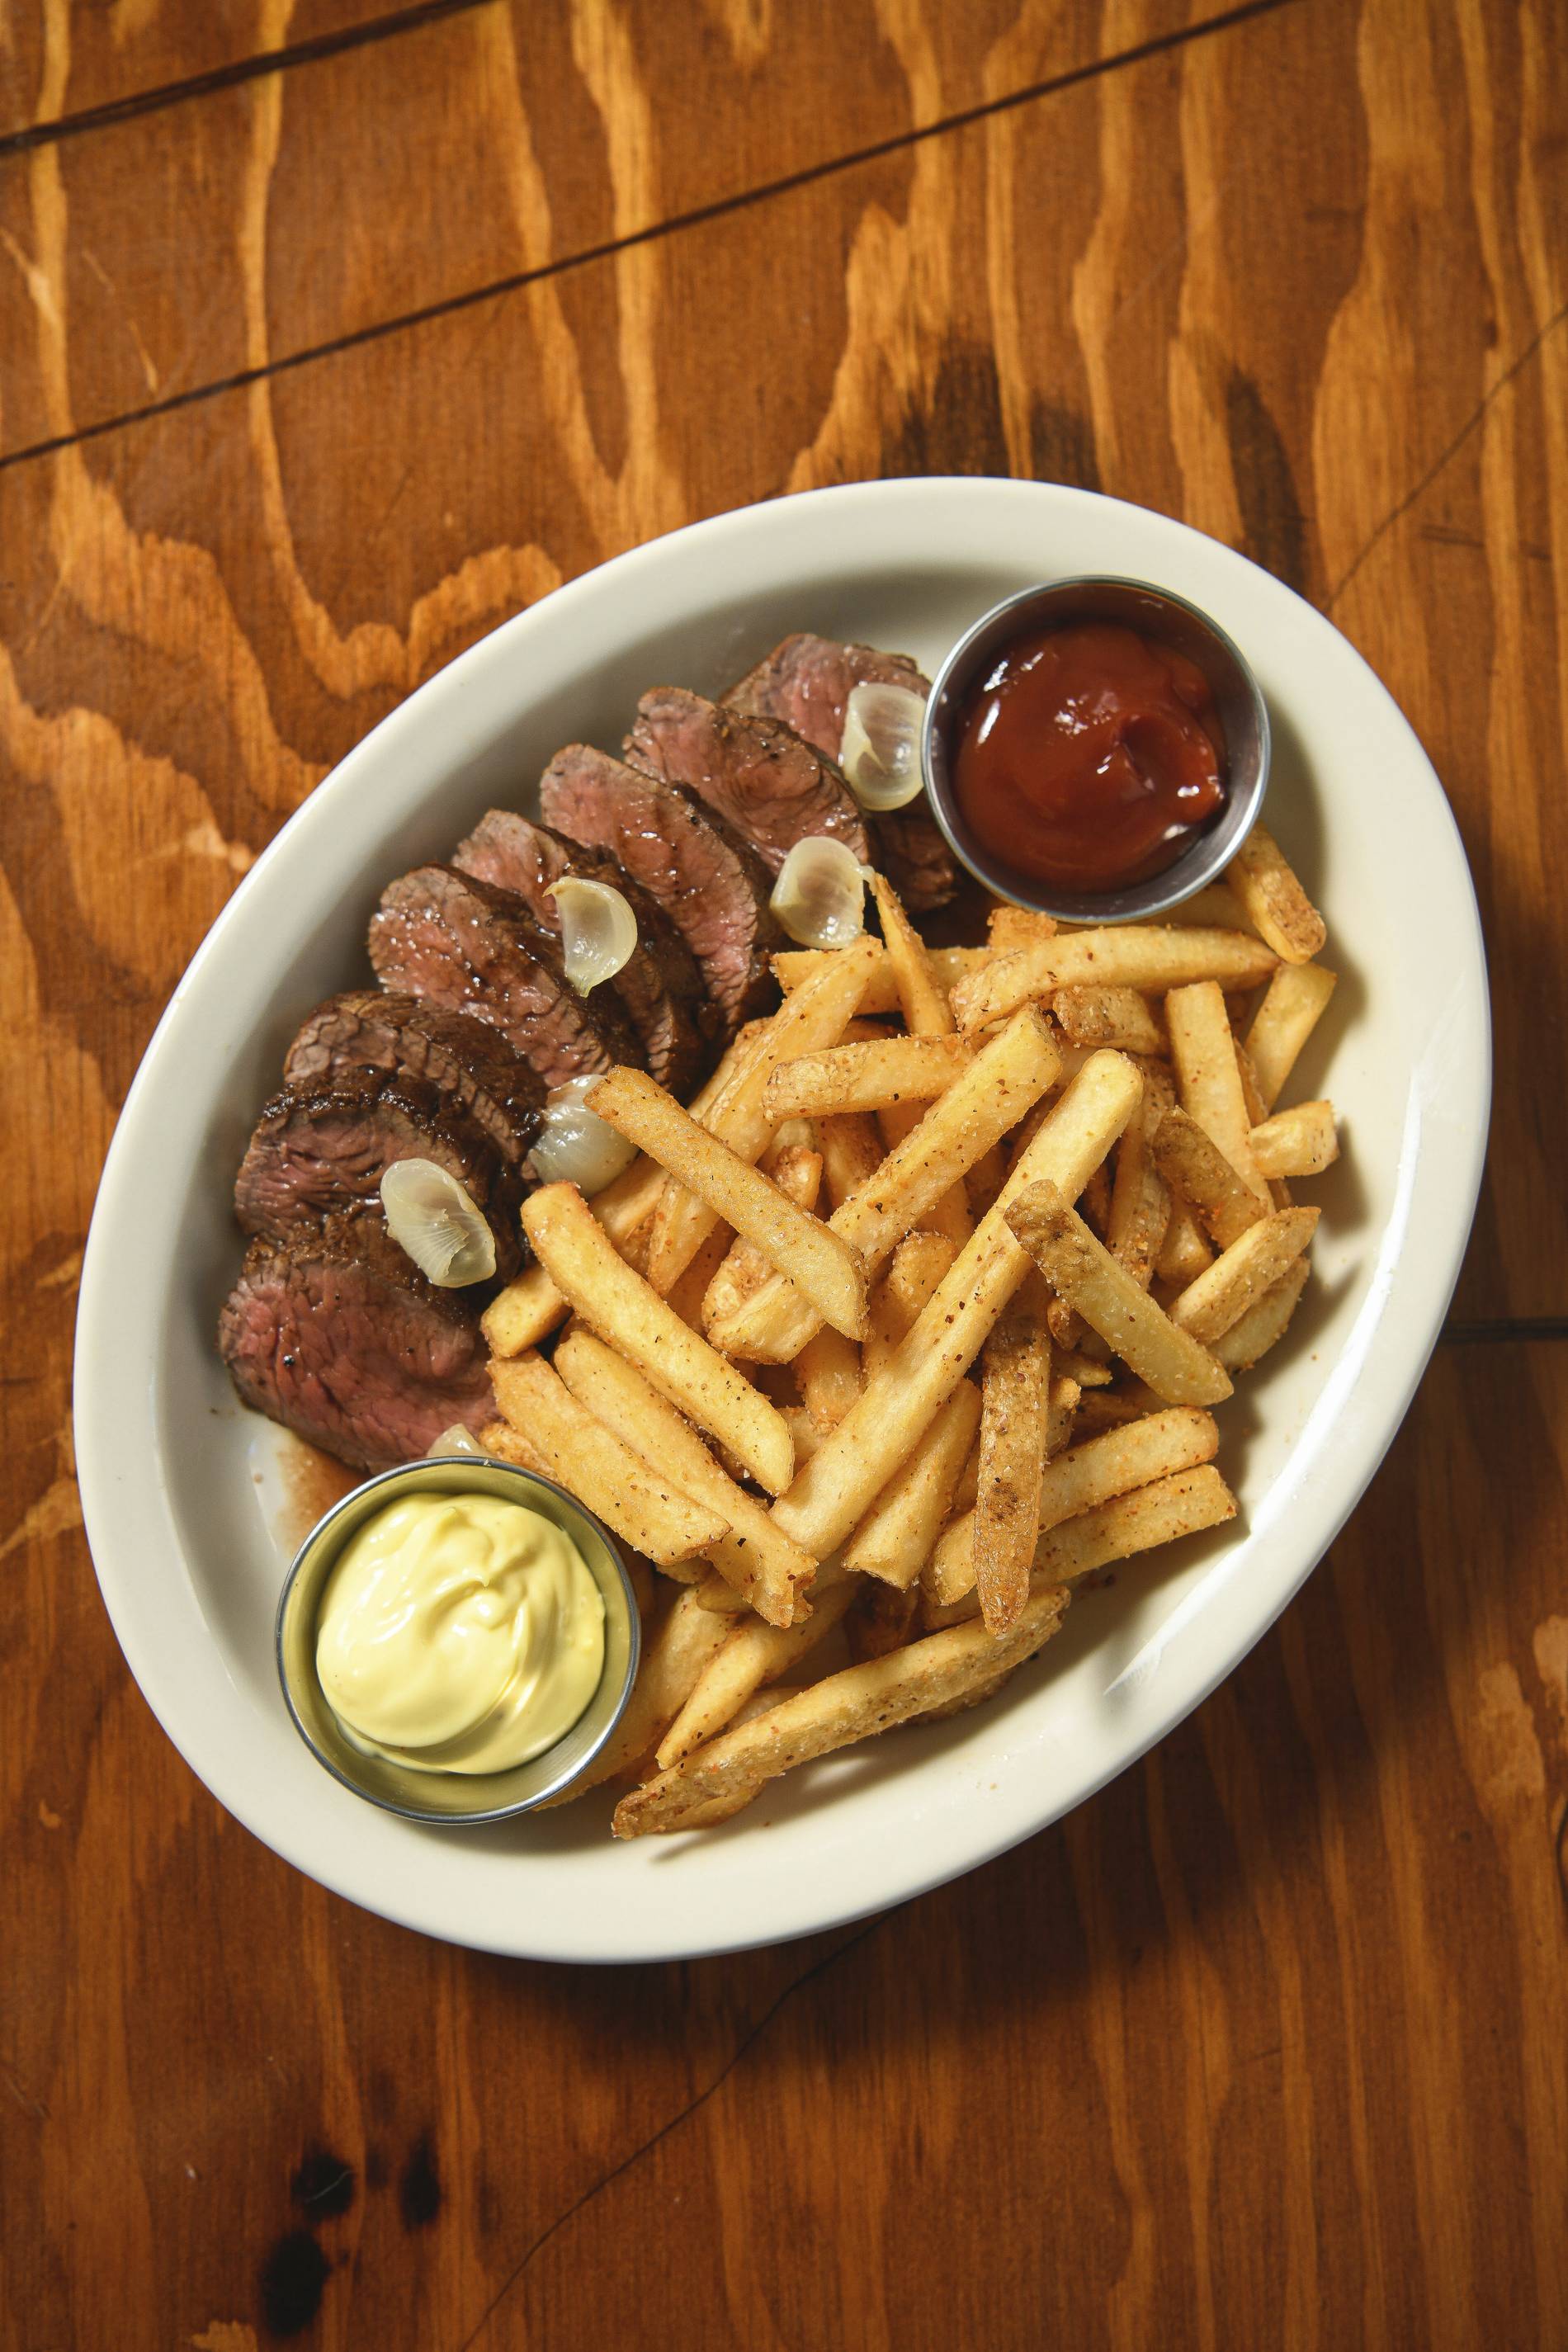 steak frites as served by cool world in nyc